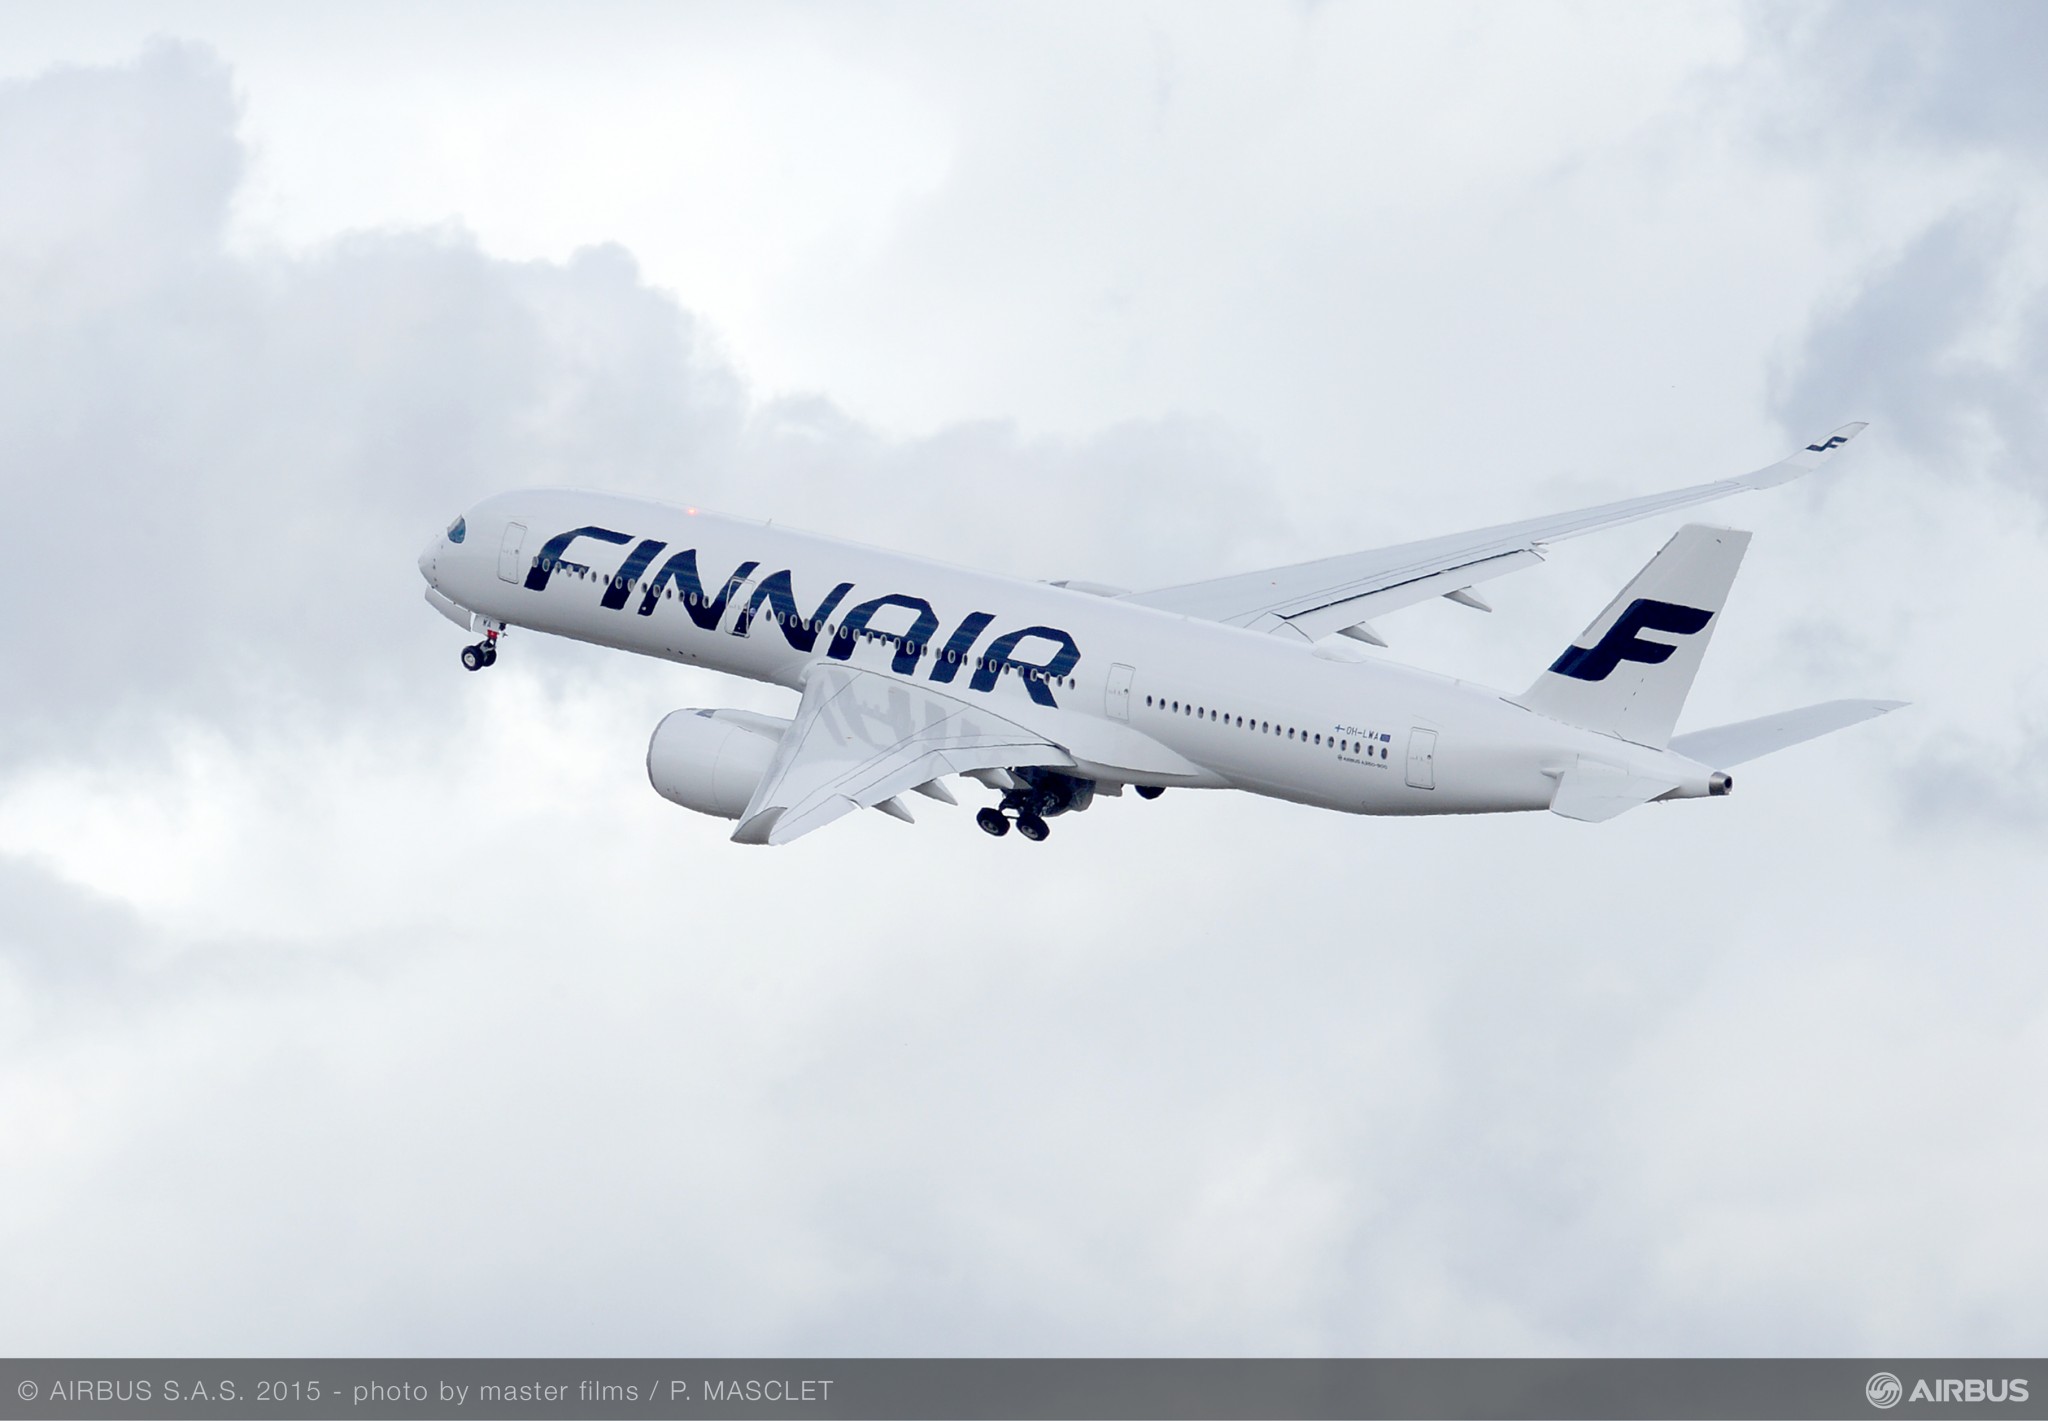 Finnair to initiate change negotiations with cabin crew in Finland